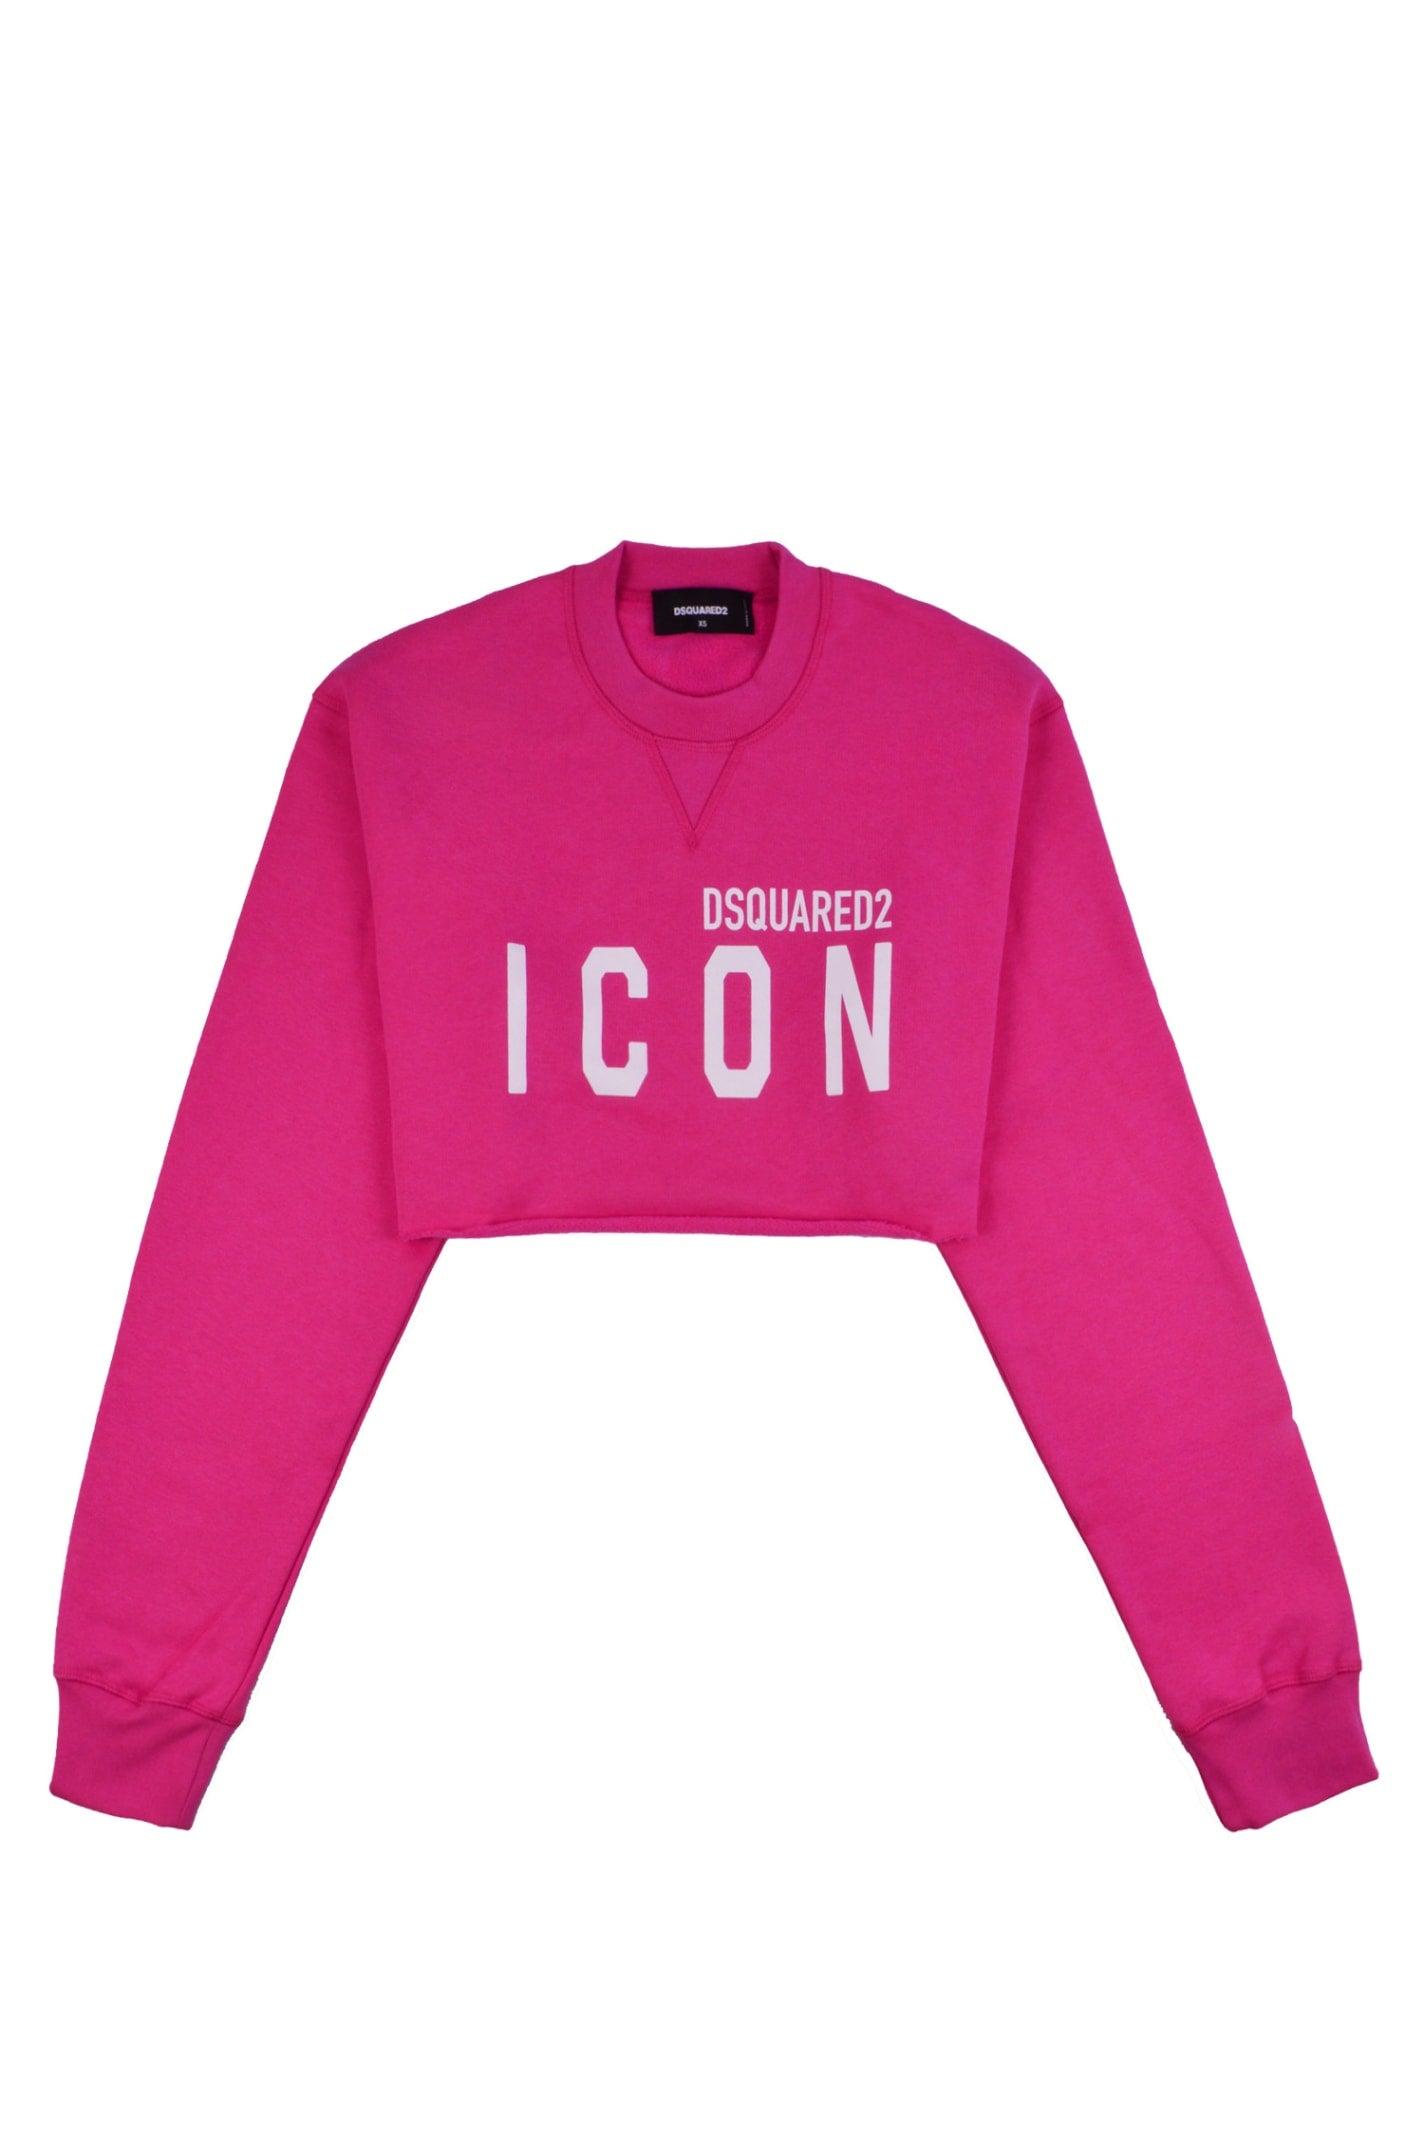 DSquared² Cropped Sweatshirt in Pink | Lyst